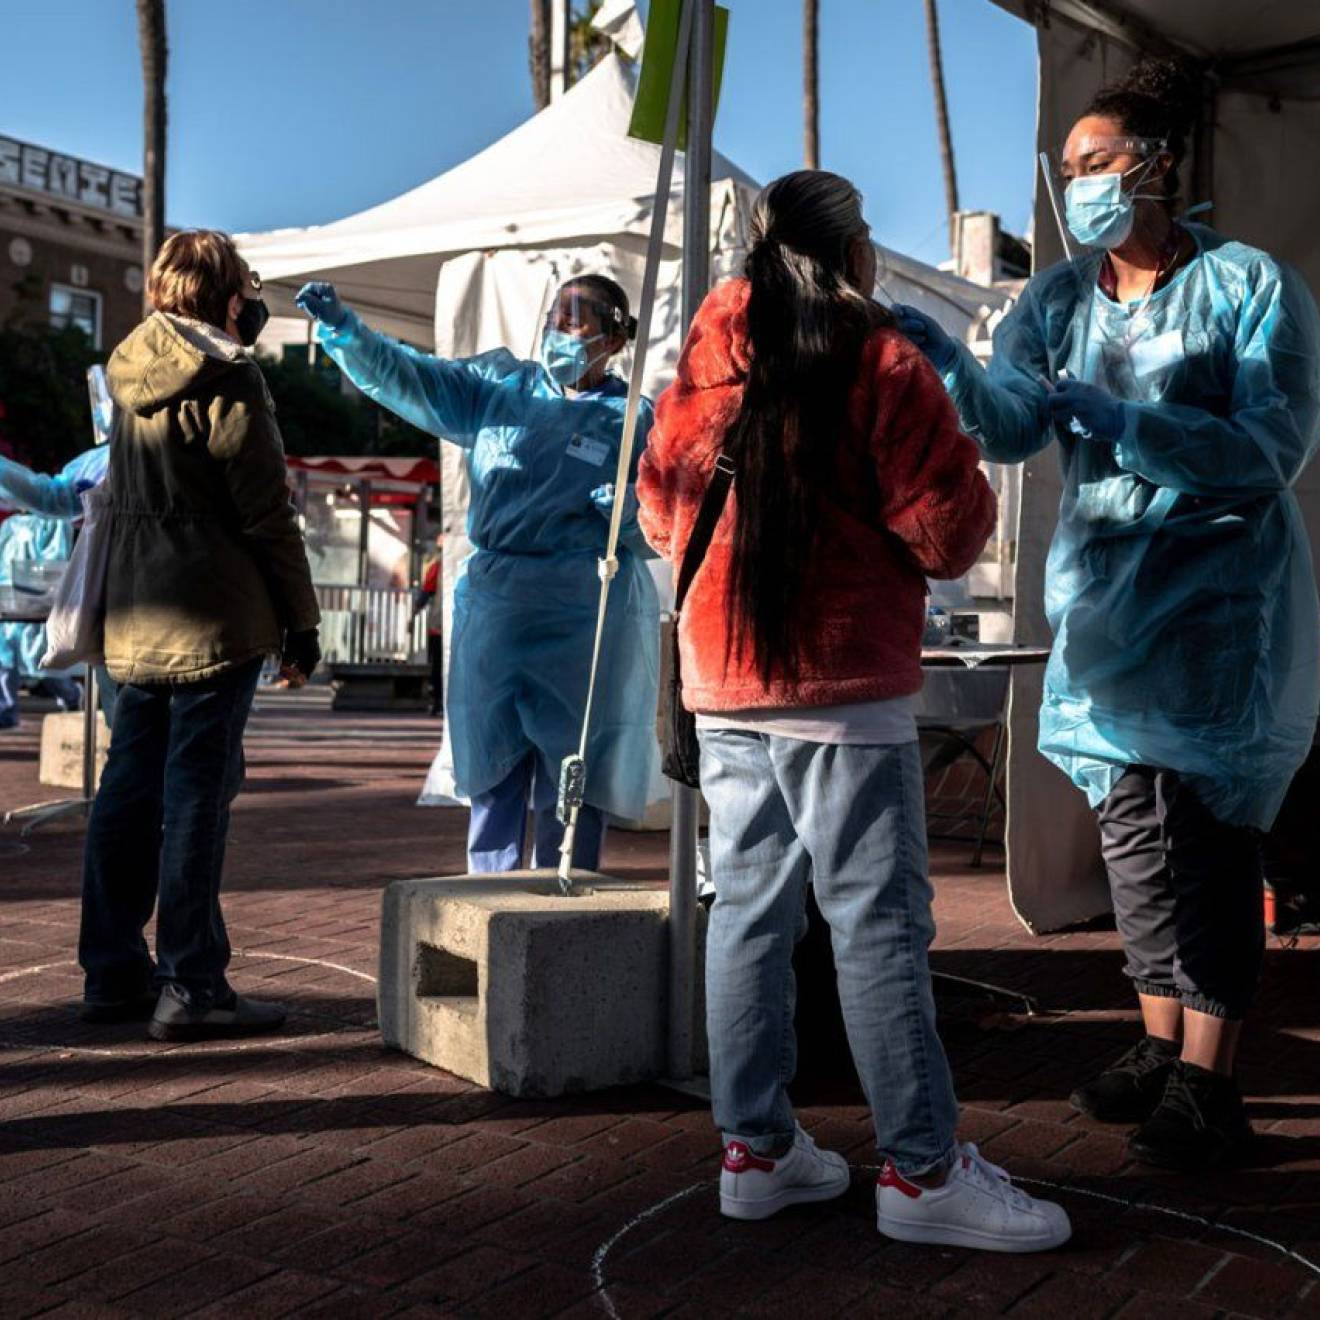 Mission residents are swabbed for COVID-19 at a pop-up, test site at the 24th St. Mission Bart Station